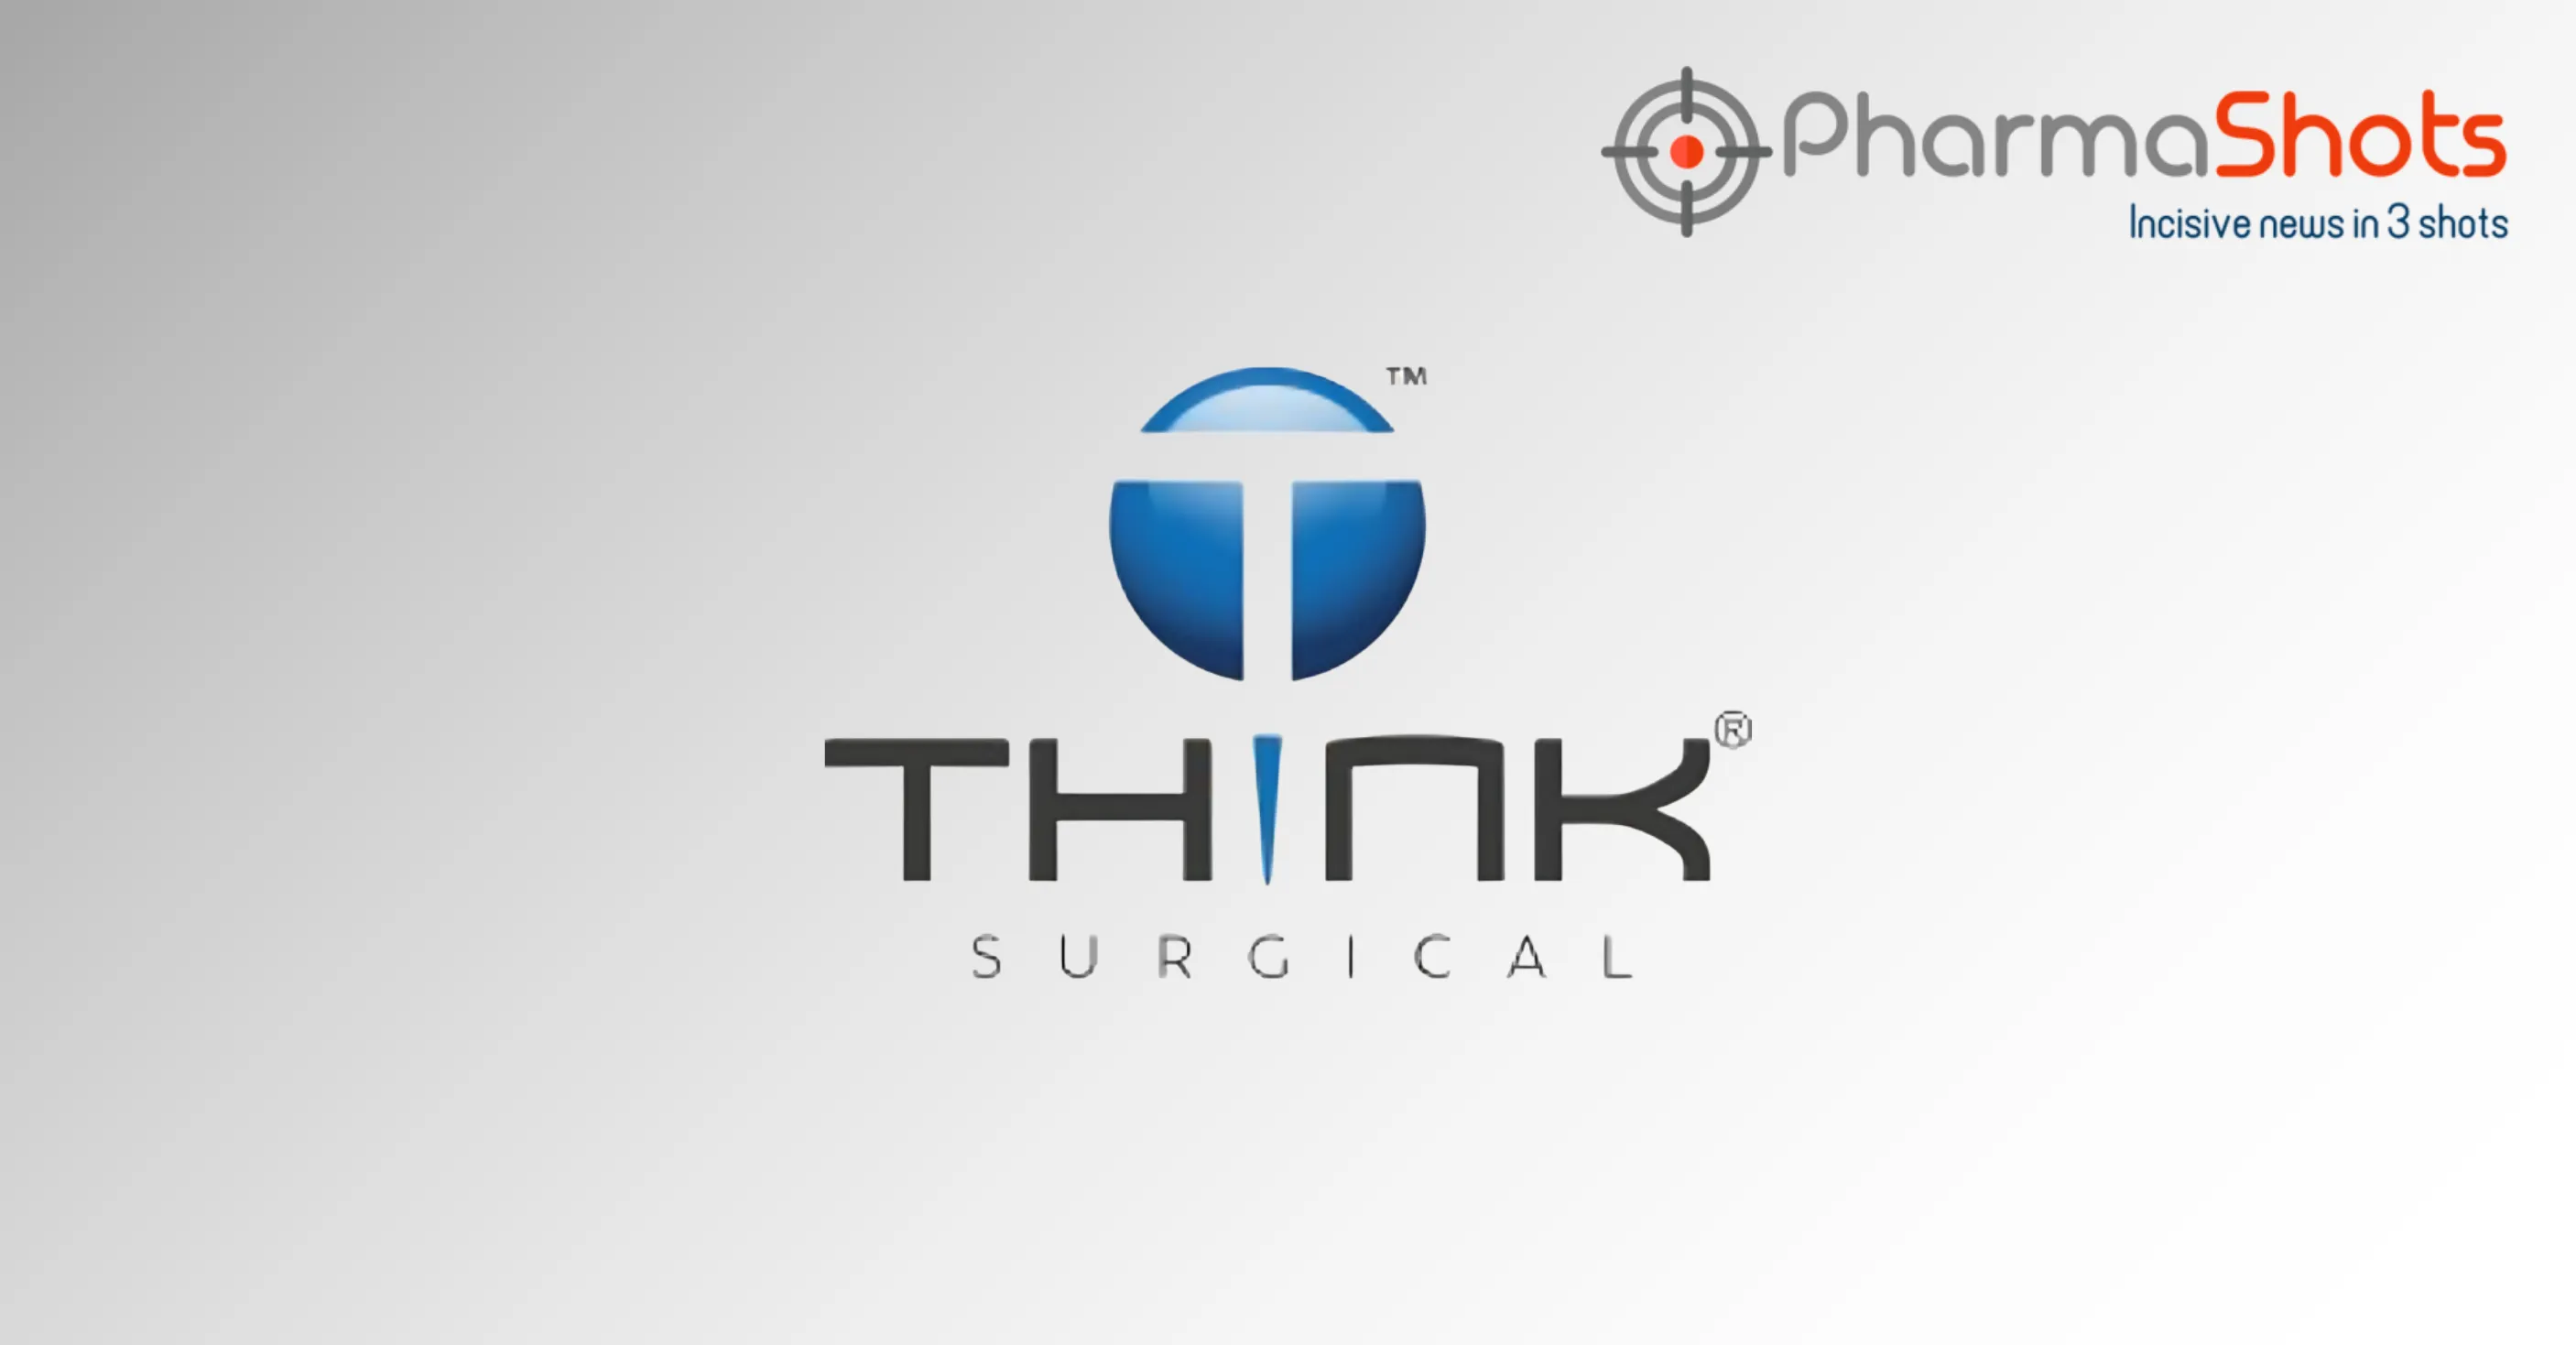 THINK Surgical Gains the US FDA’s Approval for TMINI Miniature Robotic System (TMINI 1.1)